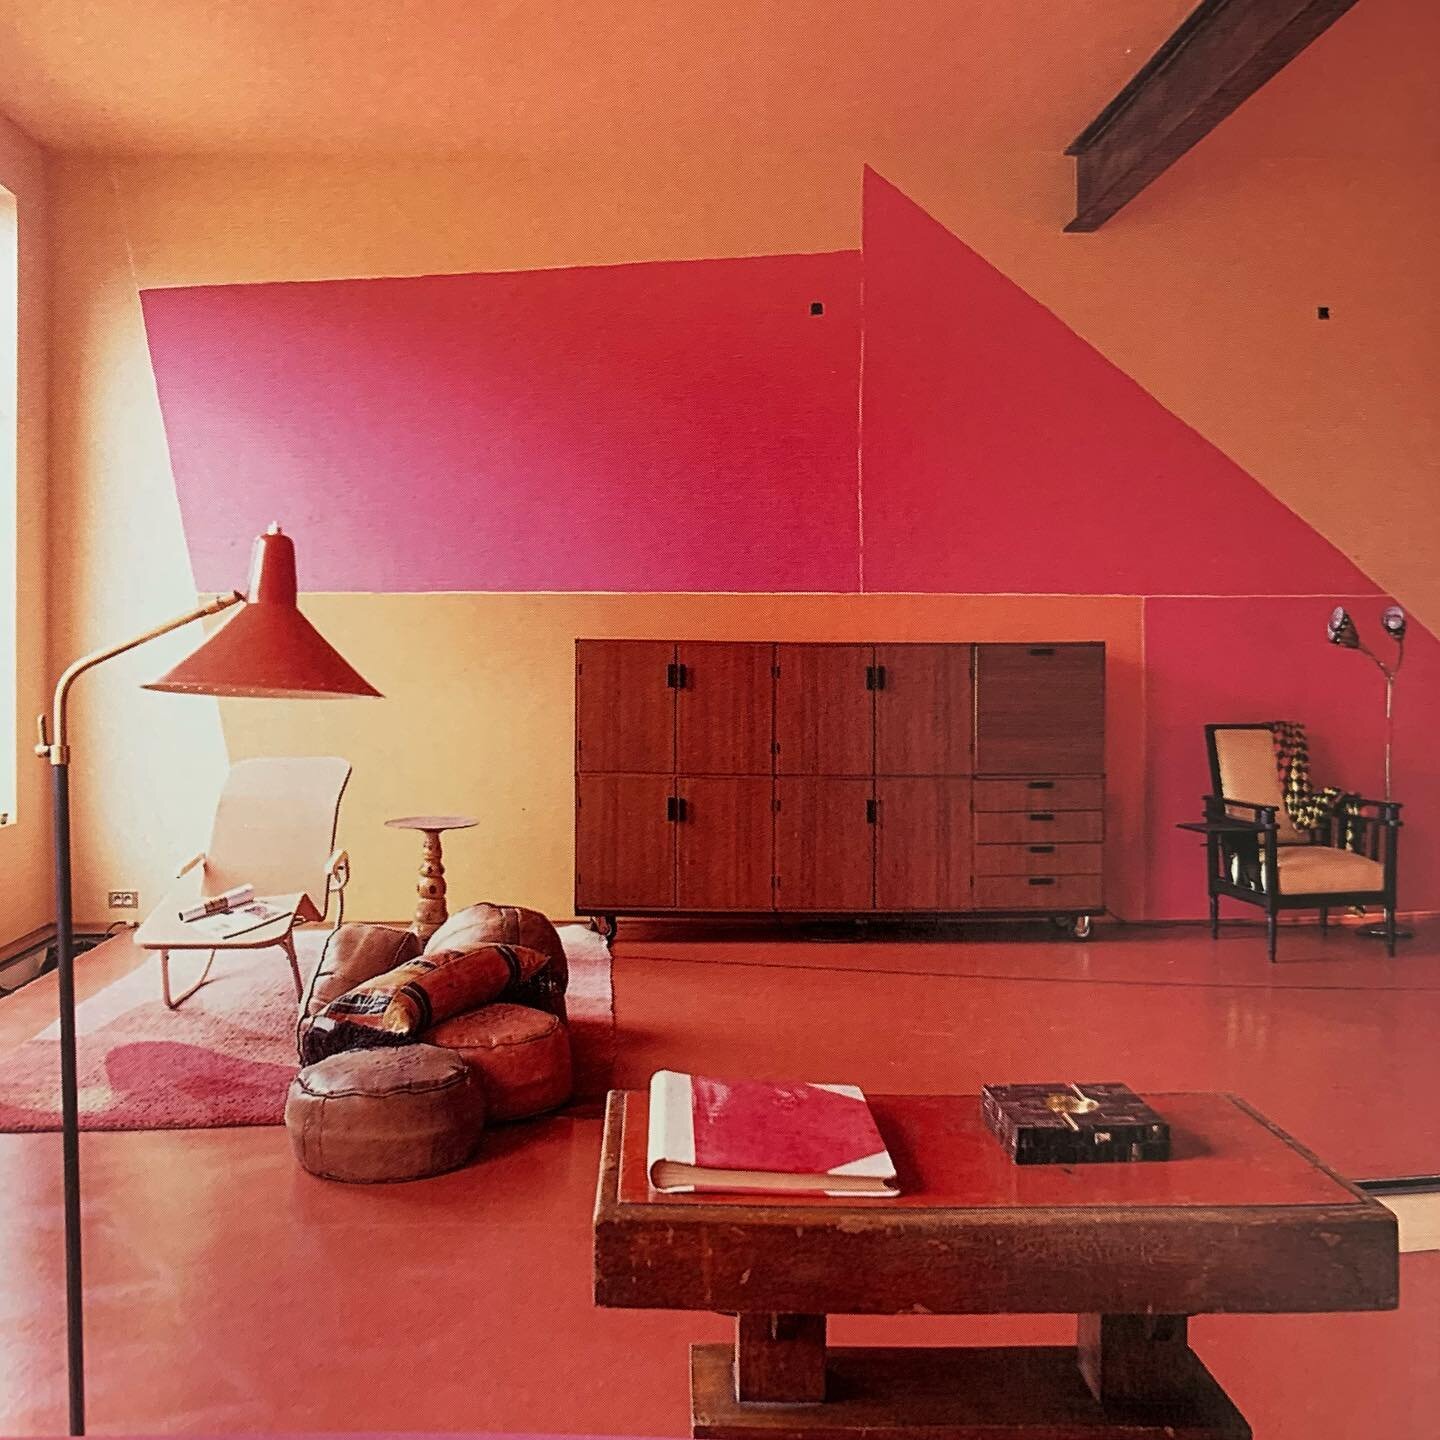 Pink Orange Red - color story from a loft conversion featured in Converted Spaces, a title from Sir Terence Conran&rsquo;s publishing house Conran Octopus c 1998. It&rsquo;s worth seeking out 
.
.
.
.
#kathleenvanzandweghe #jonasmampaey #convertedspa